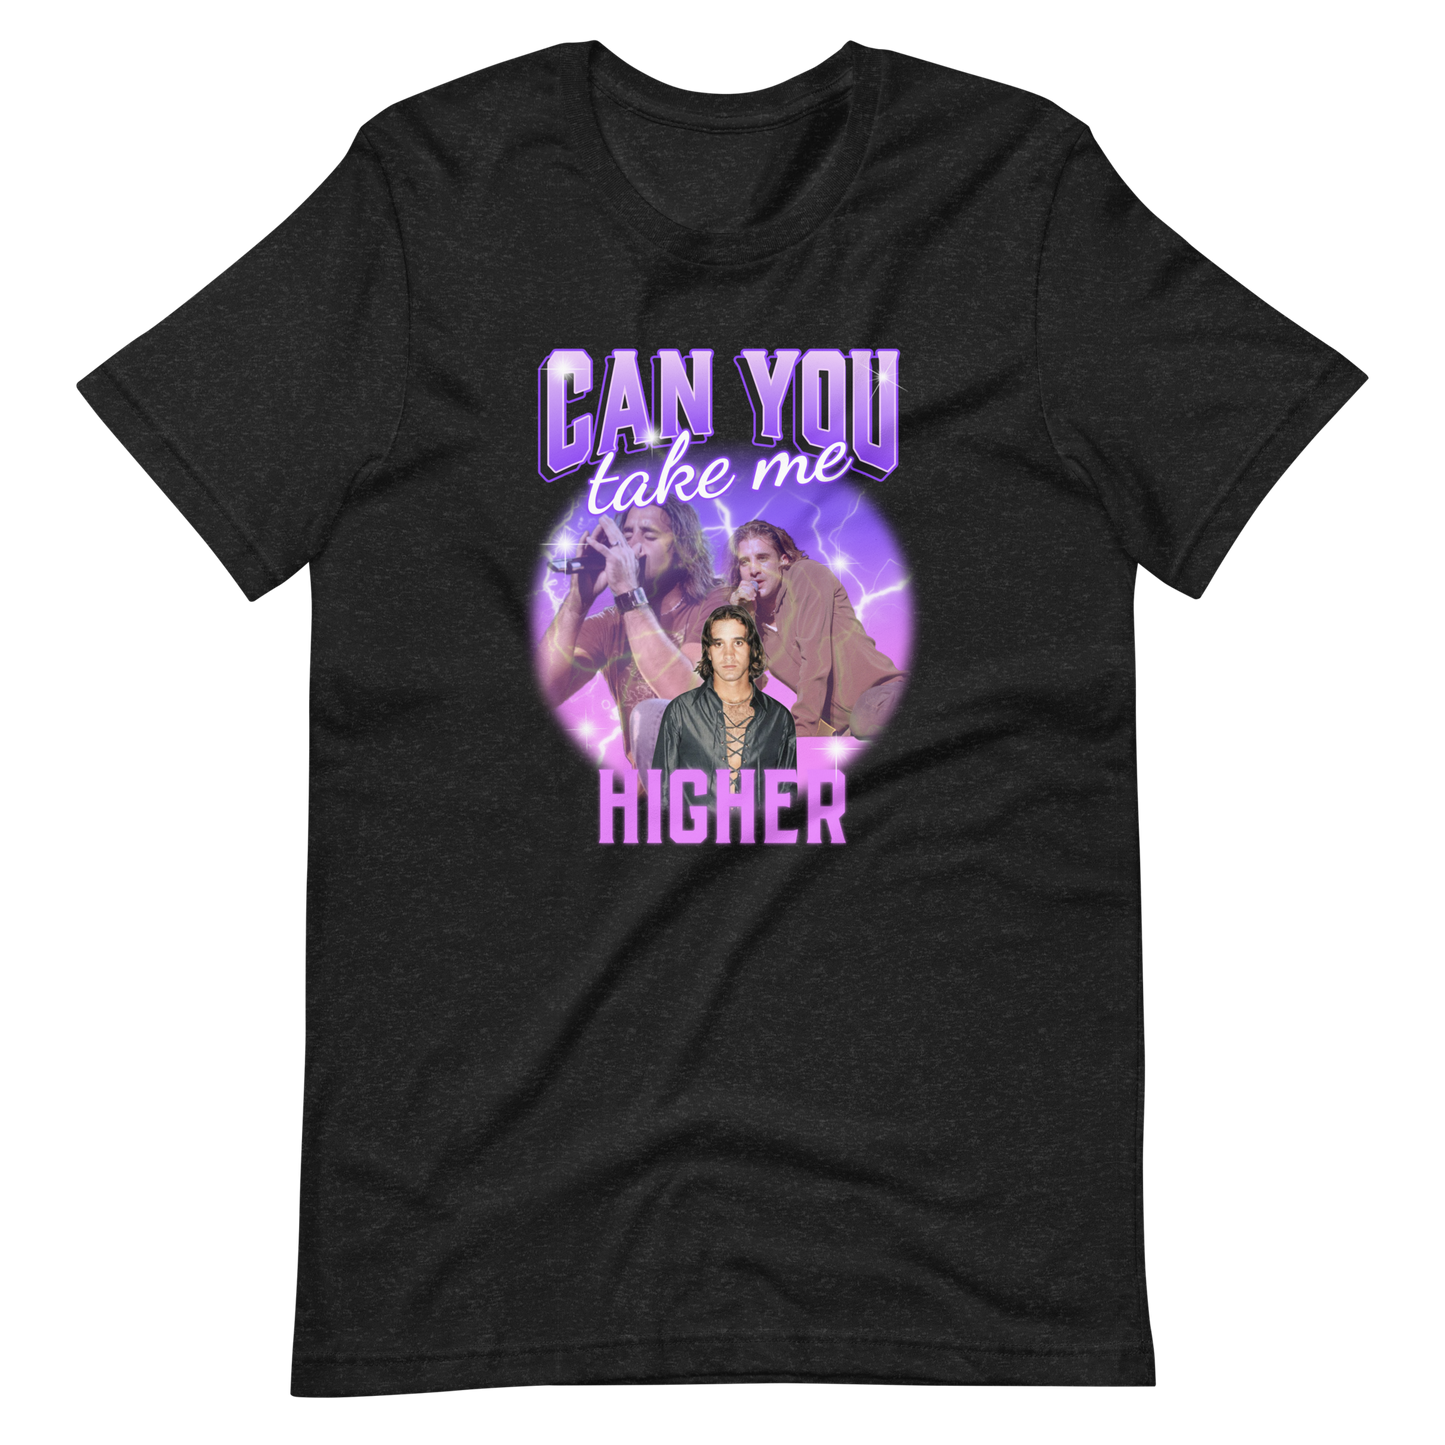 Can You Take Me Higher? Unisex t-shirt